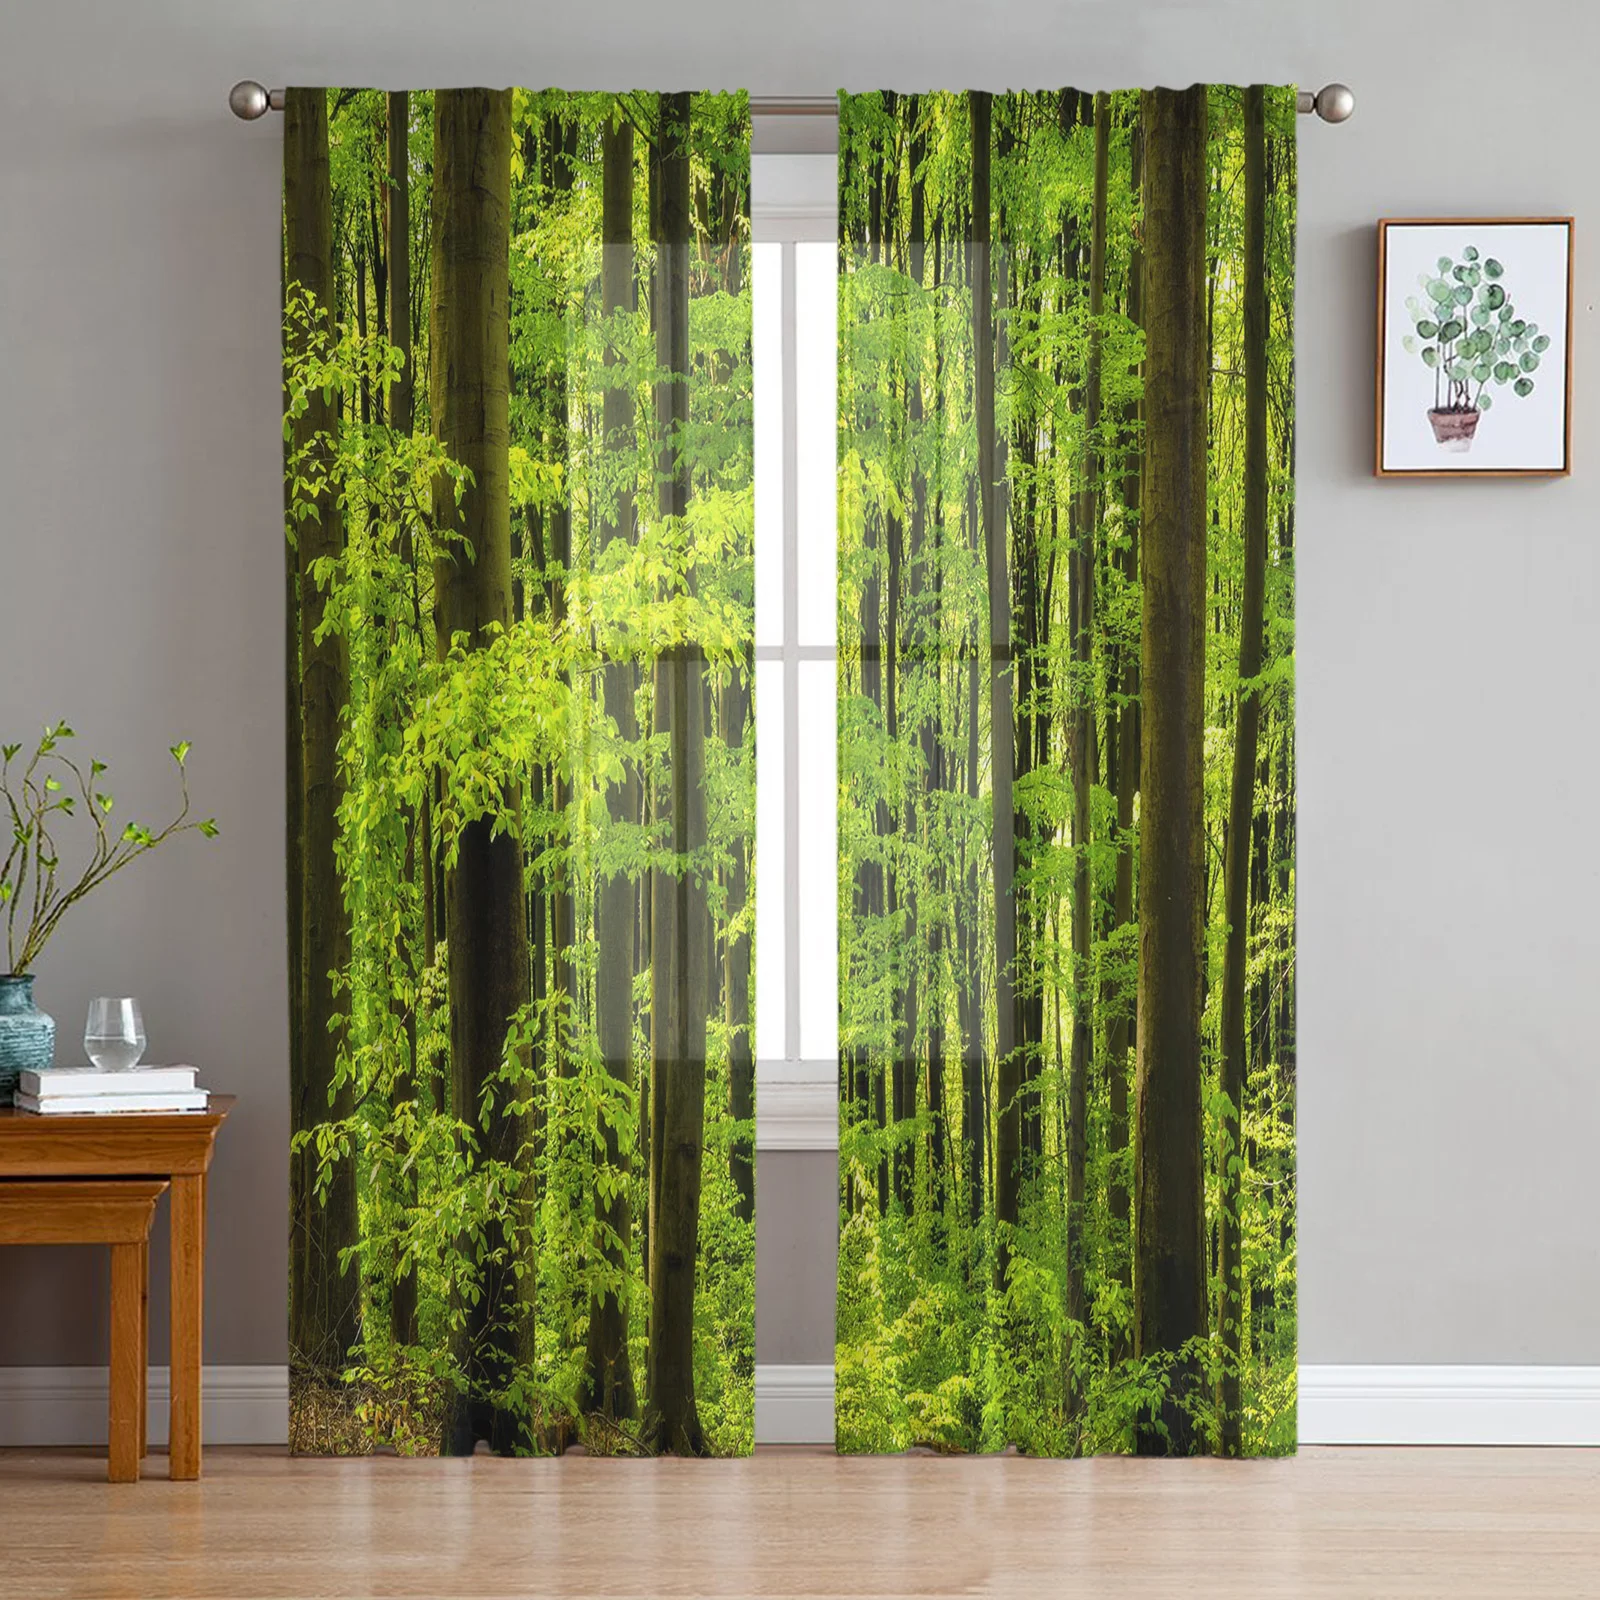 

Forest Green Trees Leaves Plants Natural Scenery Tulle Sheer Window Curtains for Living Room Bedroom Tulle Voile Curtains Decor